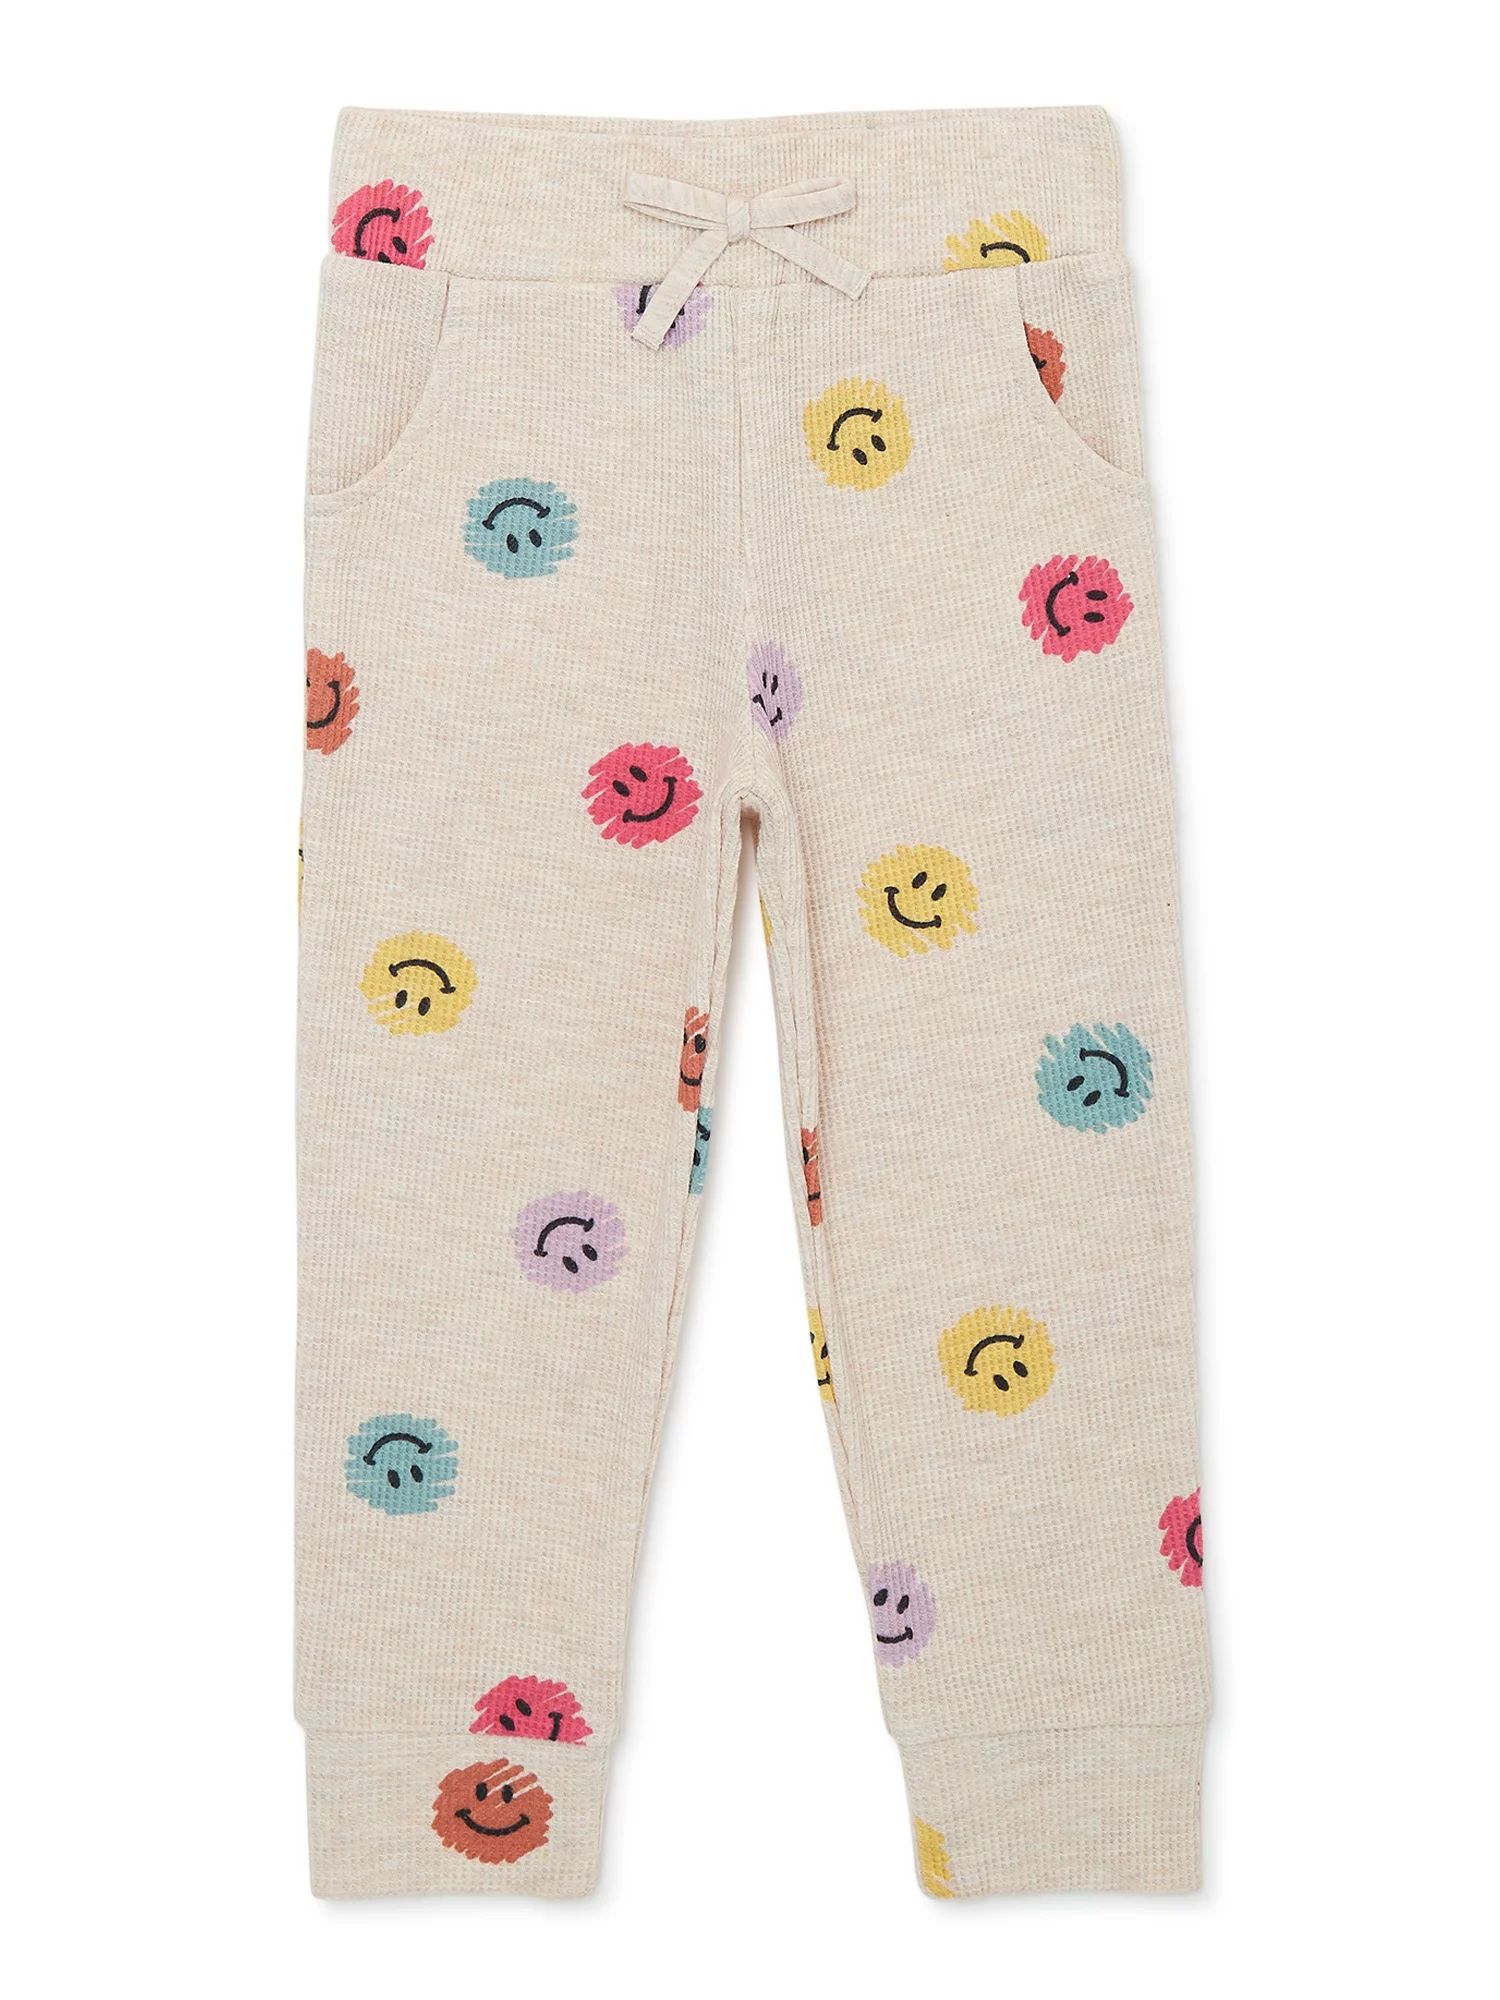 Garanimals Baby and Toddler Girls Thermal Joggers, Sizes 12 Months-5T | Walmart (US)